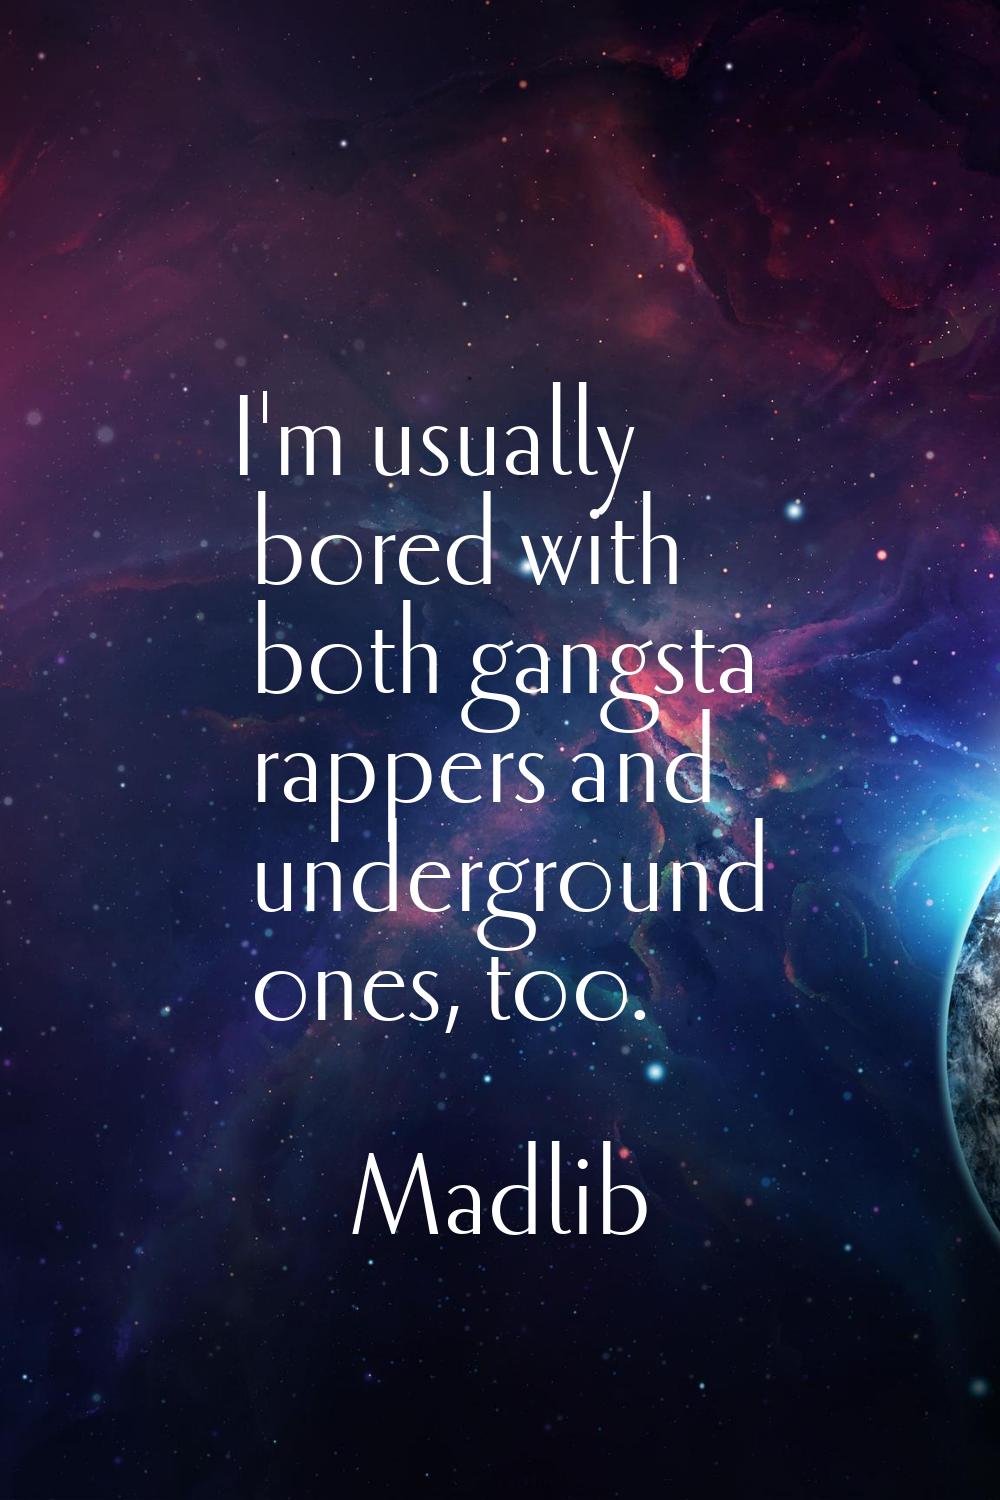 I'm usually bored with both gangsta rappers and underground ones, too.